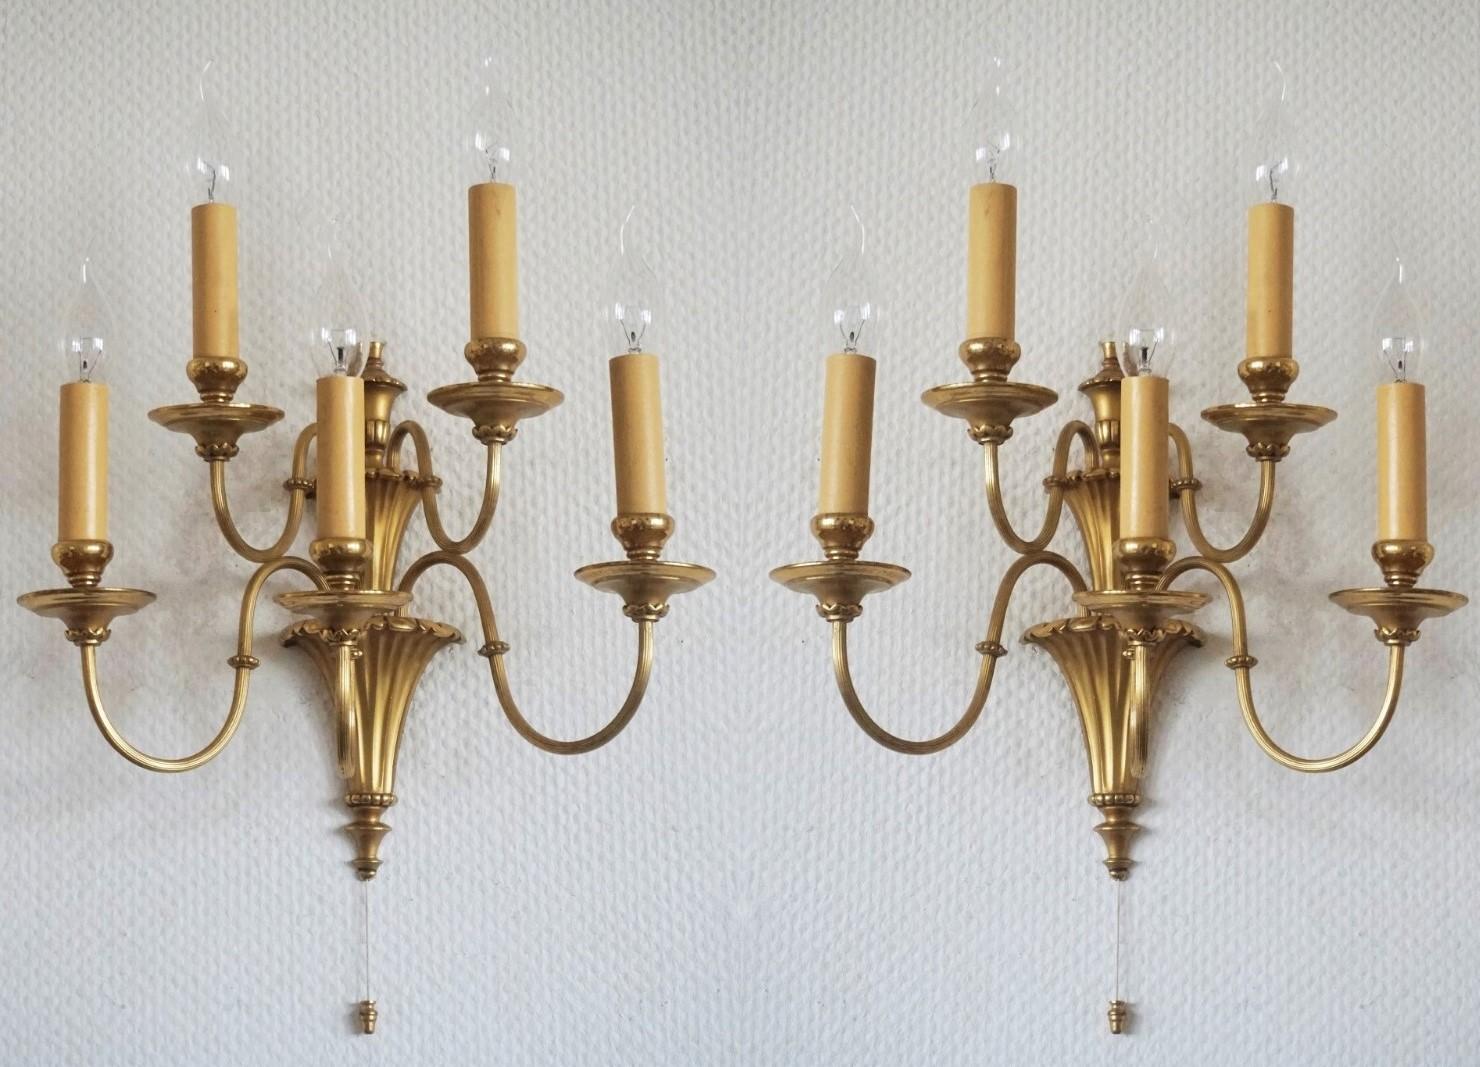 Set of four Victorian style gilt brass wall sconces with five scrolling arms and a fluted conical base, England, late 19th century. The sconces have been electrified and refinished to its original shine.
Five E14 candelabra light bulb holders with